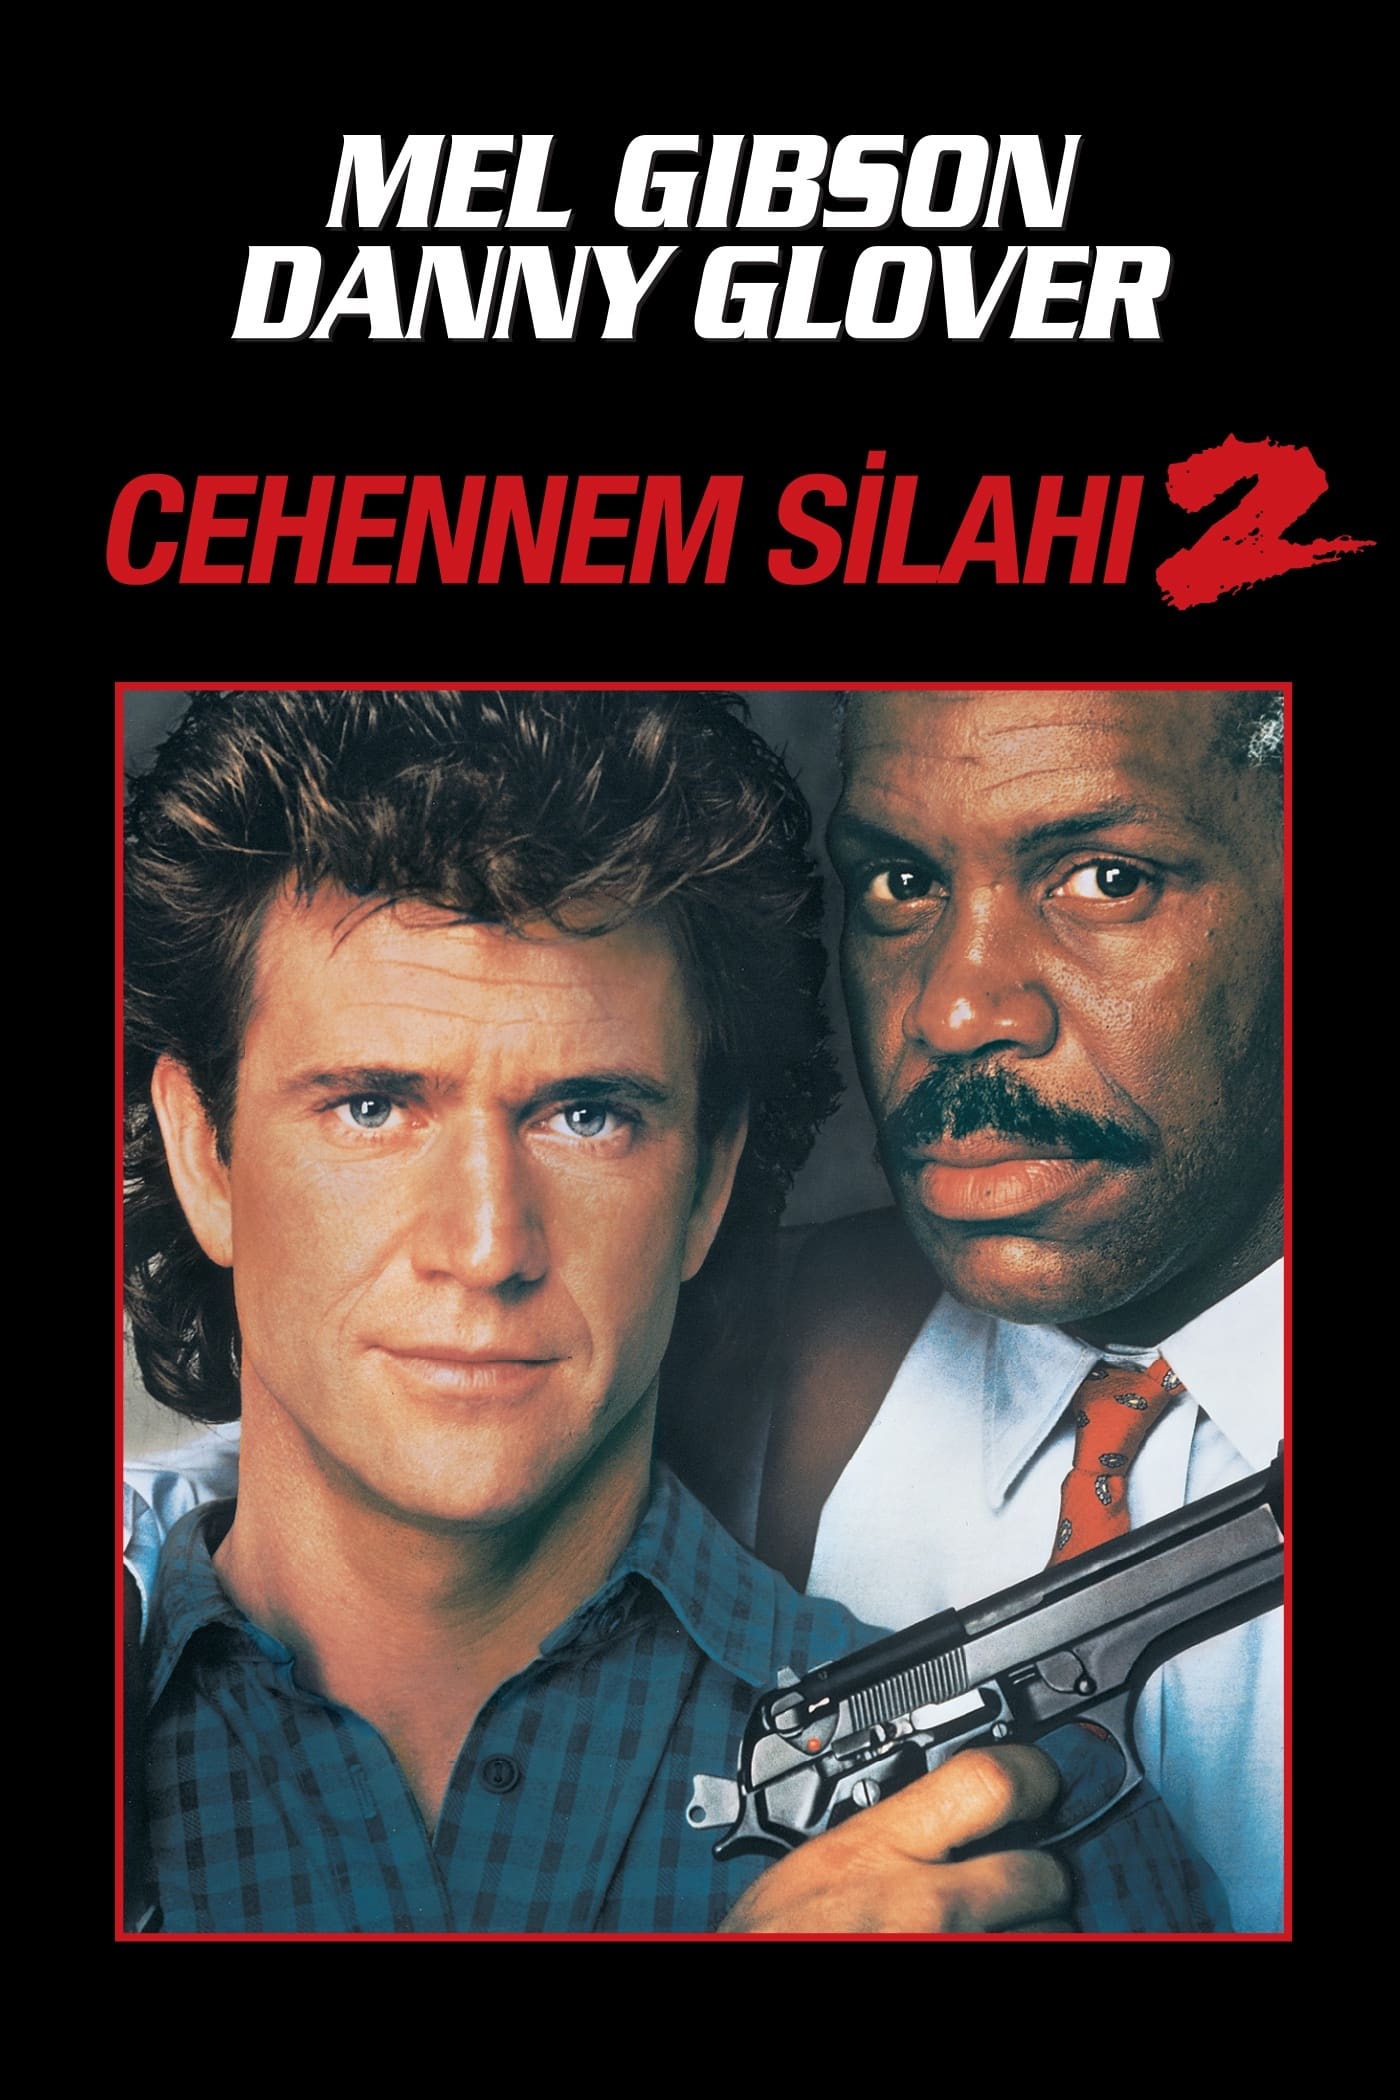 Lethal Weapon 2